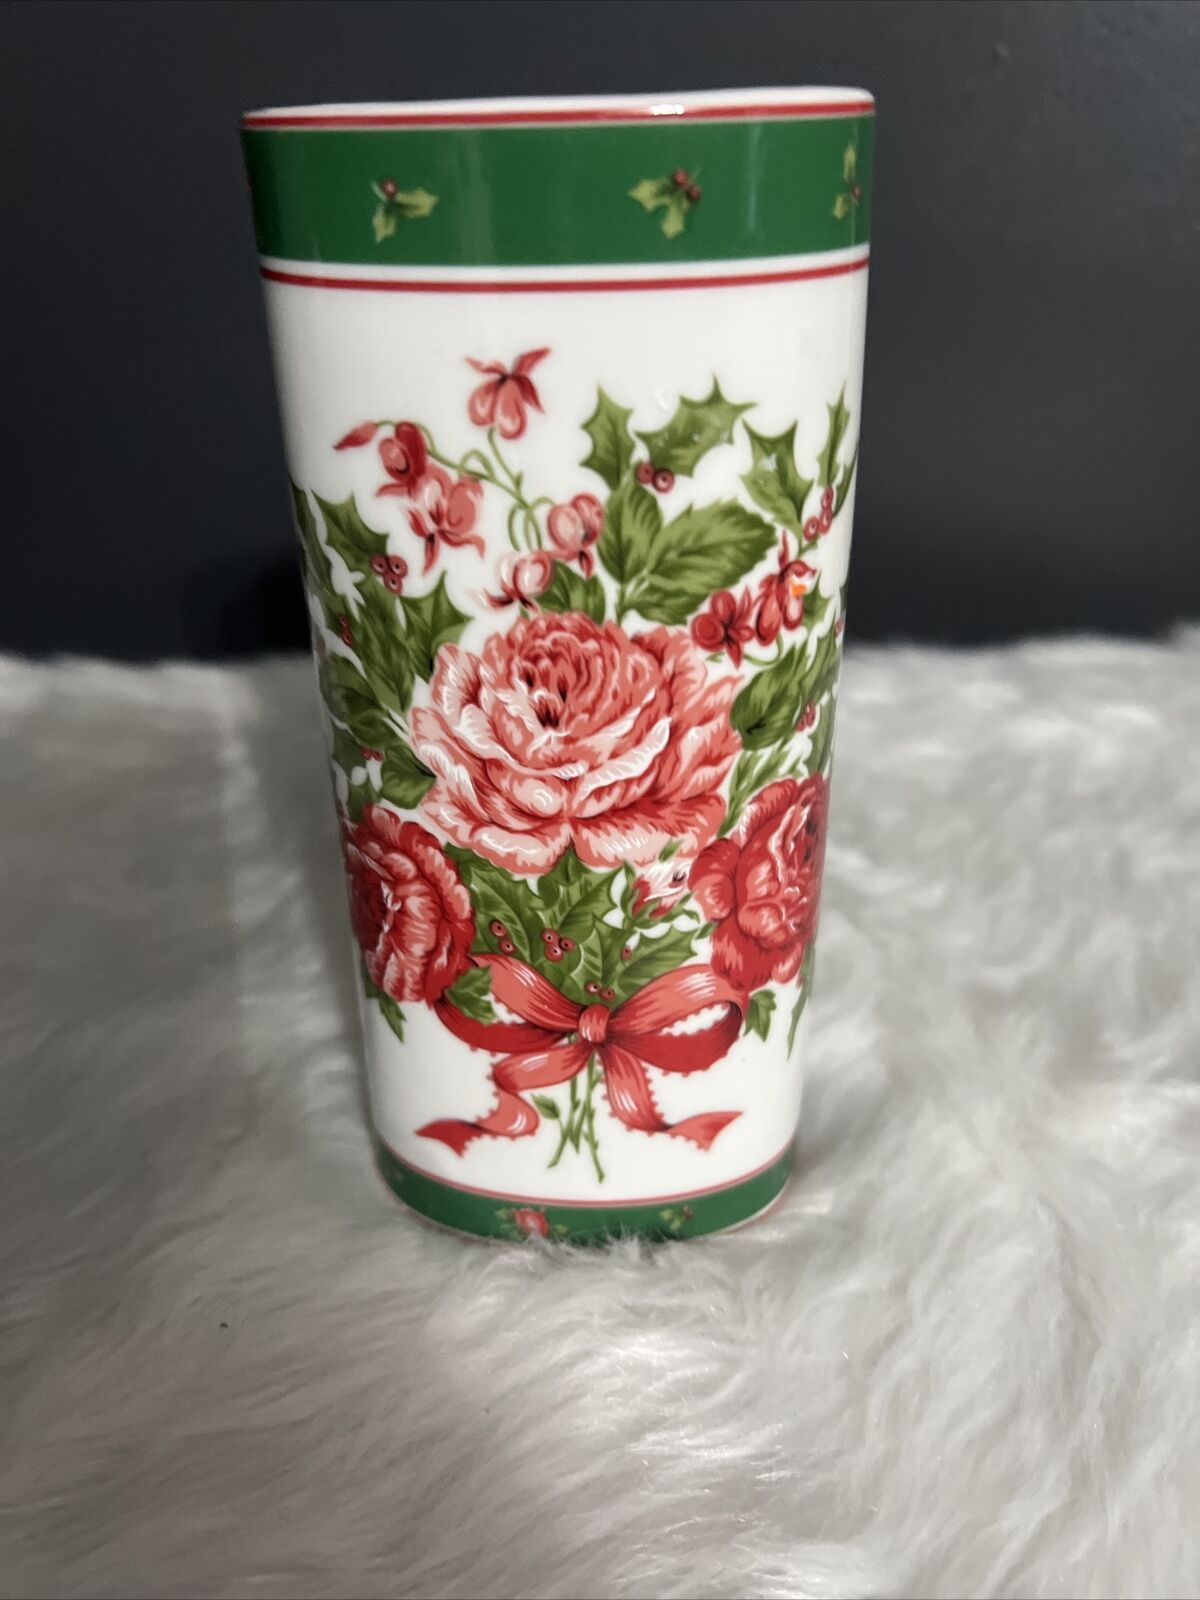 VTG Lefton Holly Berry & Floral 6” Flower Vase 07678 Green Red Christmas Holiday